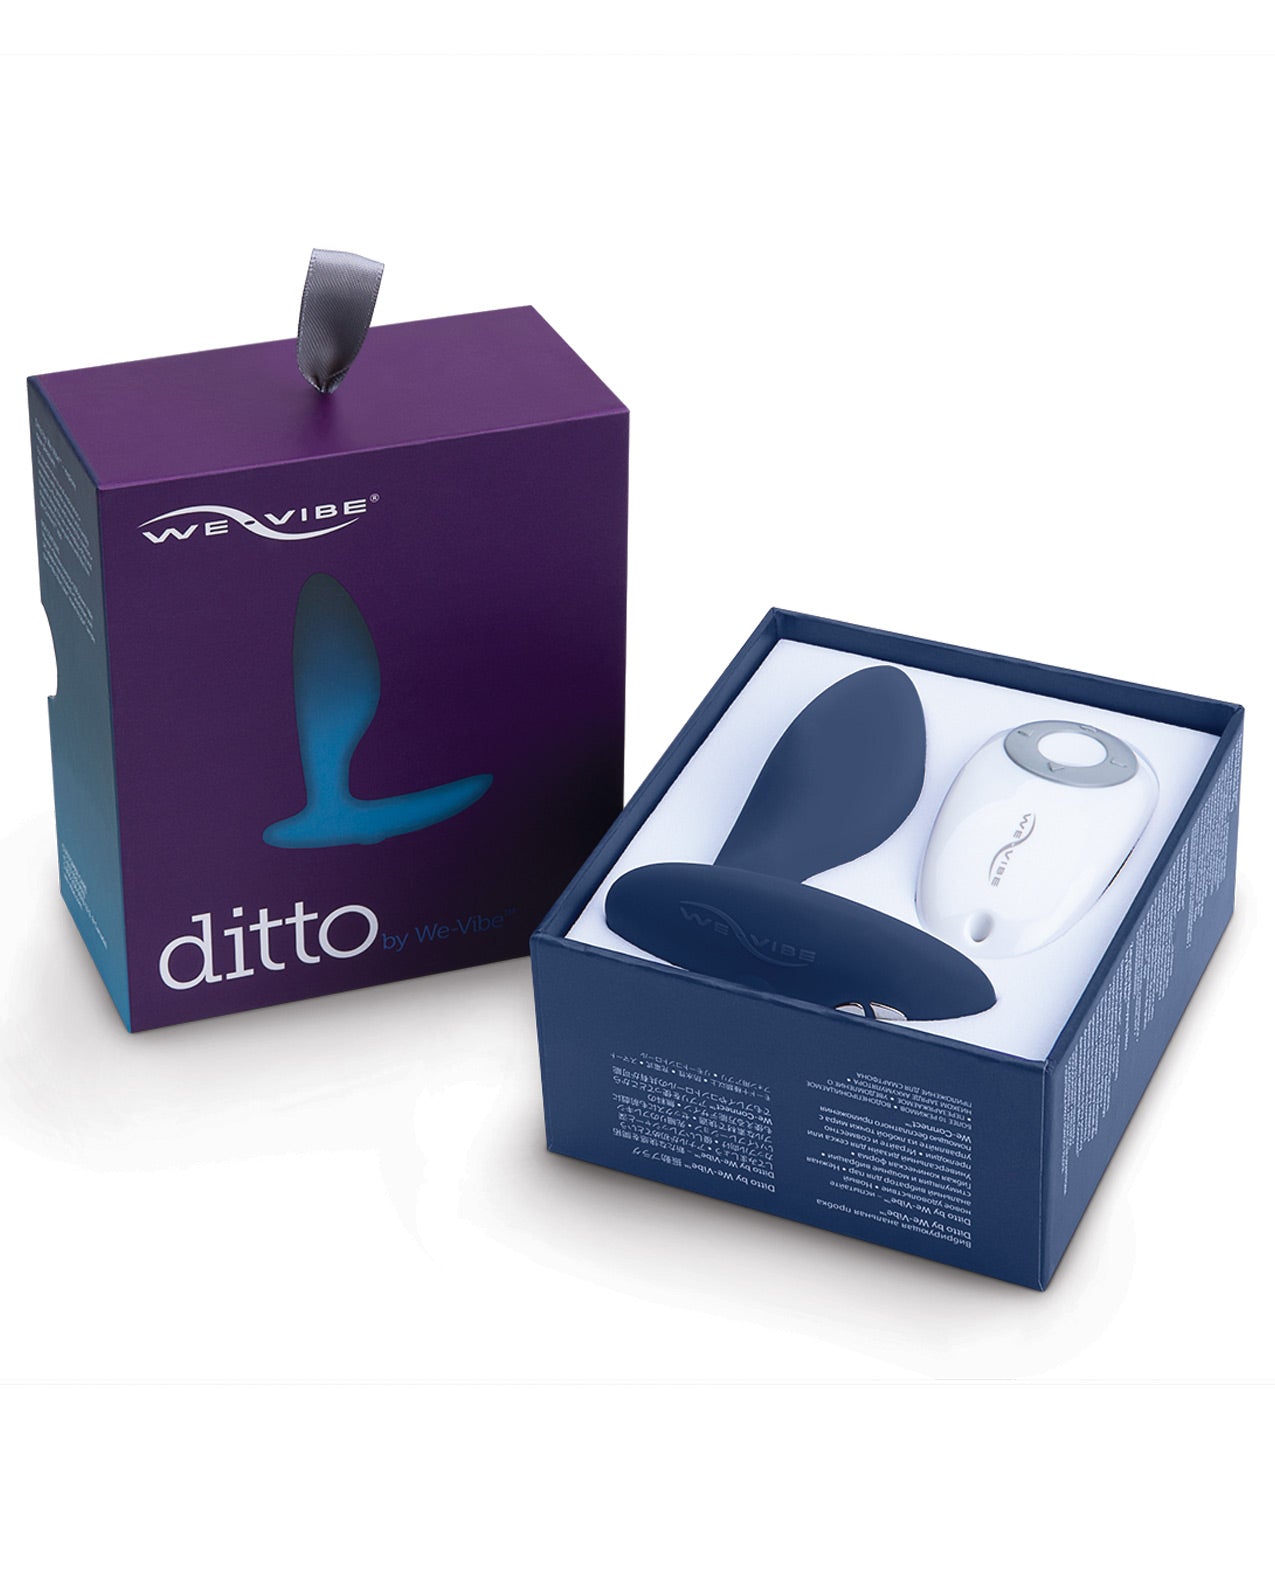 We-Vibe Dittos - Blue